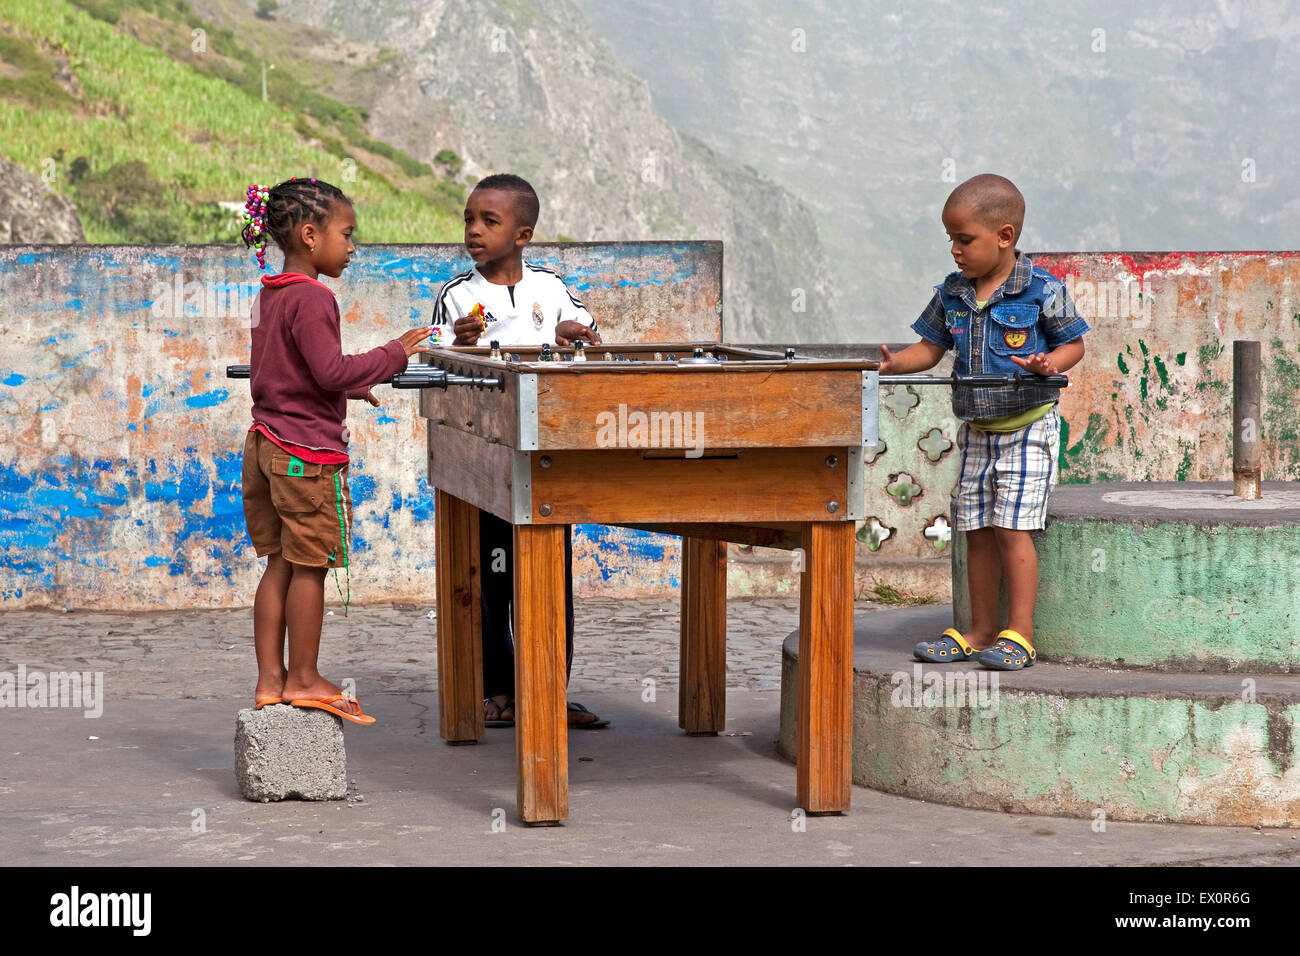 Creole children playing table football / kicker on the island Santo Antão, Cape Verde / Cabo Verde, Western Africa Stock Photo